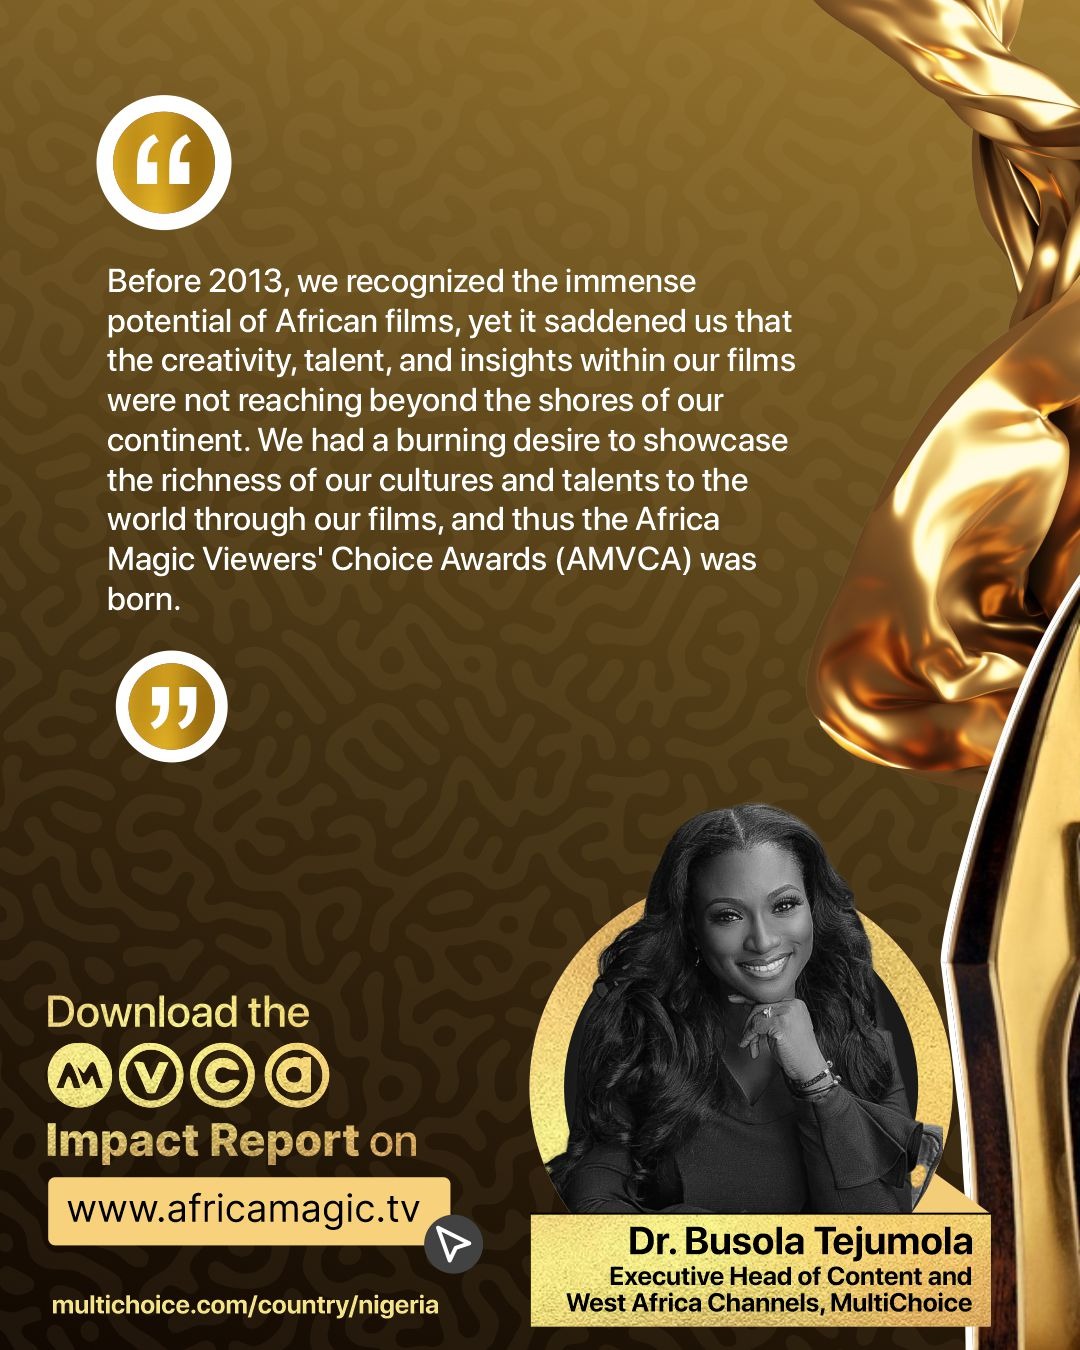 Busola Quote - Multichoice Reveals N9Billion Investment in AMVCA and Awards Impact Report On Film/TV Sector